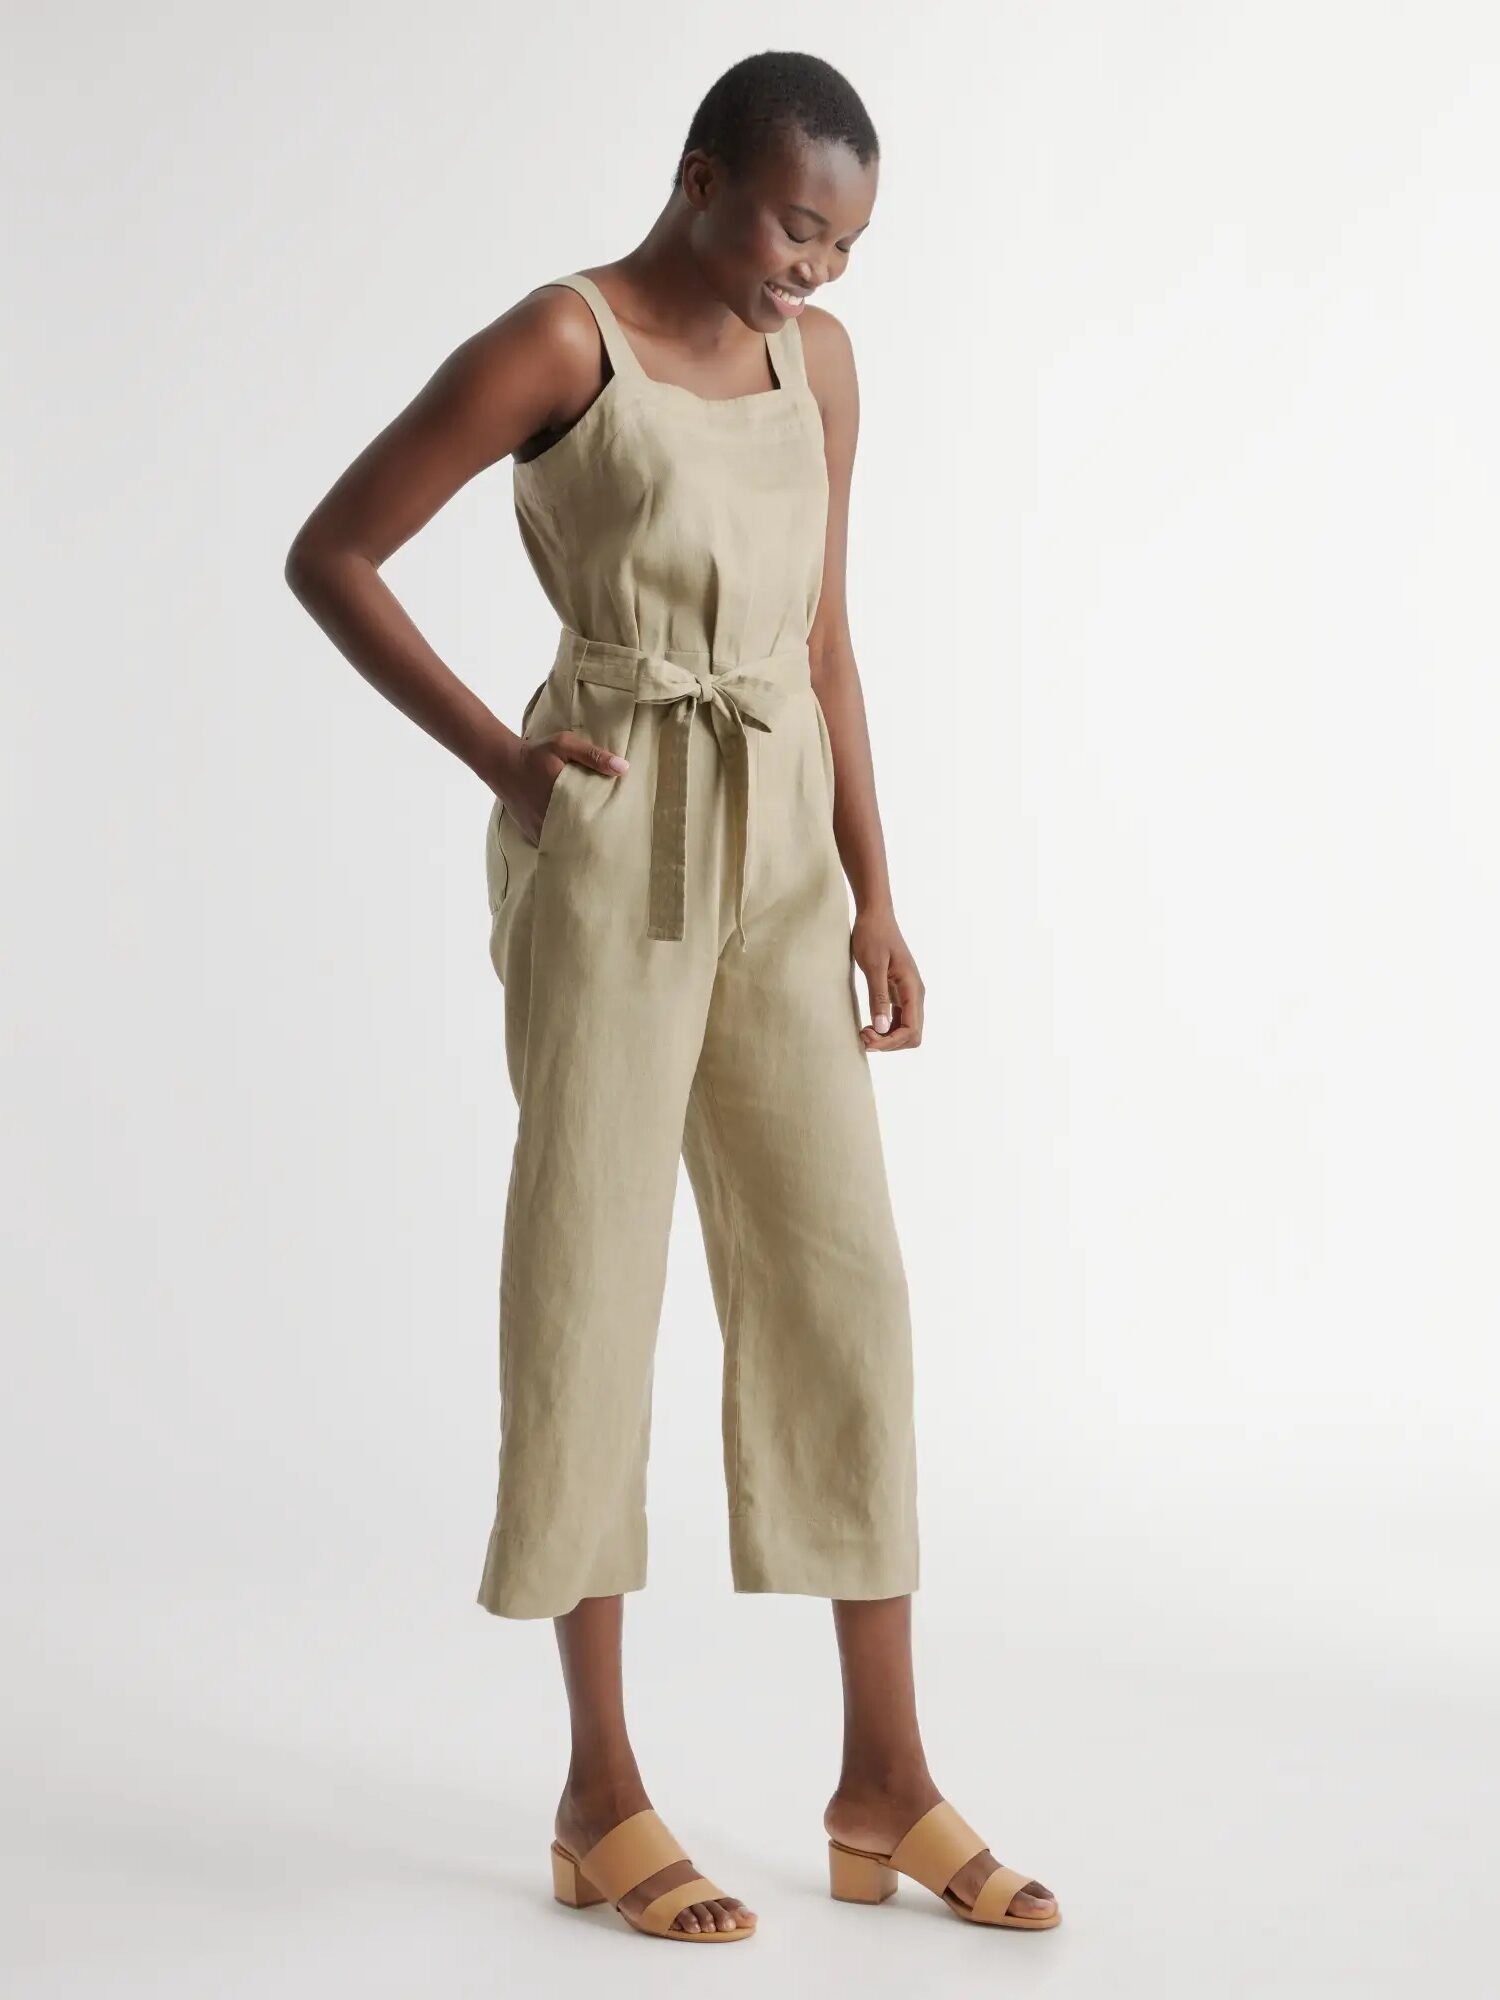 9 Best Affordable Linen Clothing Brands For Breezy Basics - The Good Trade